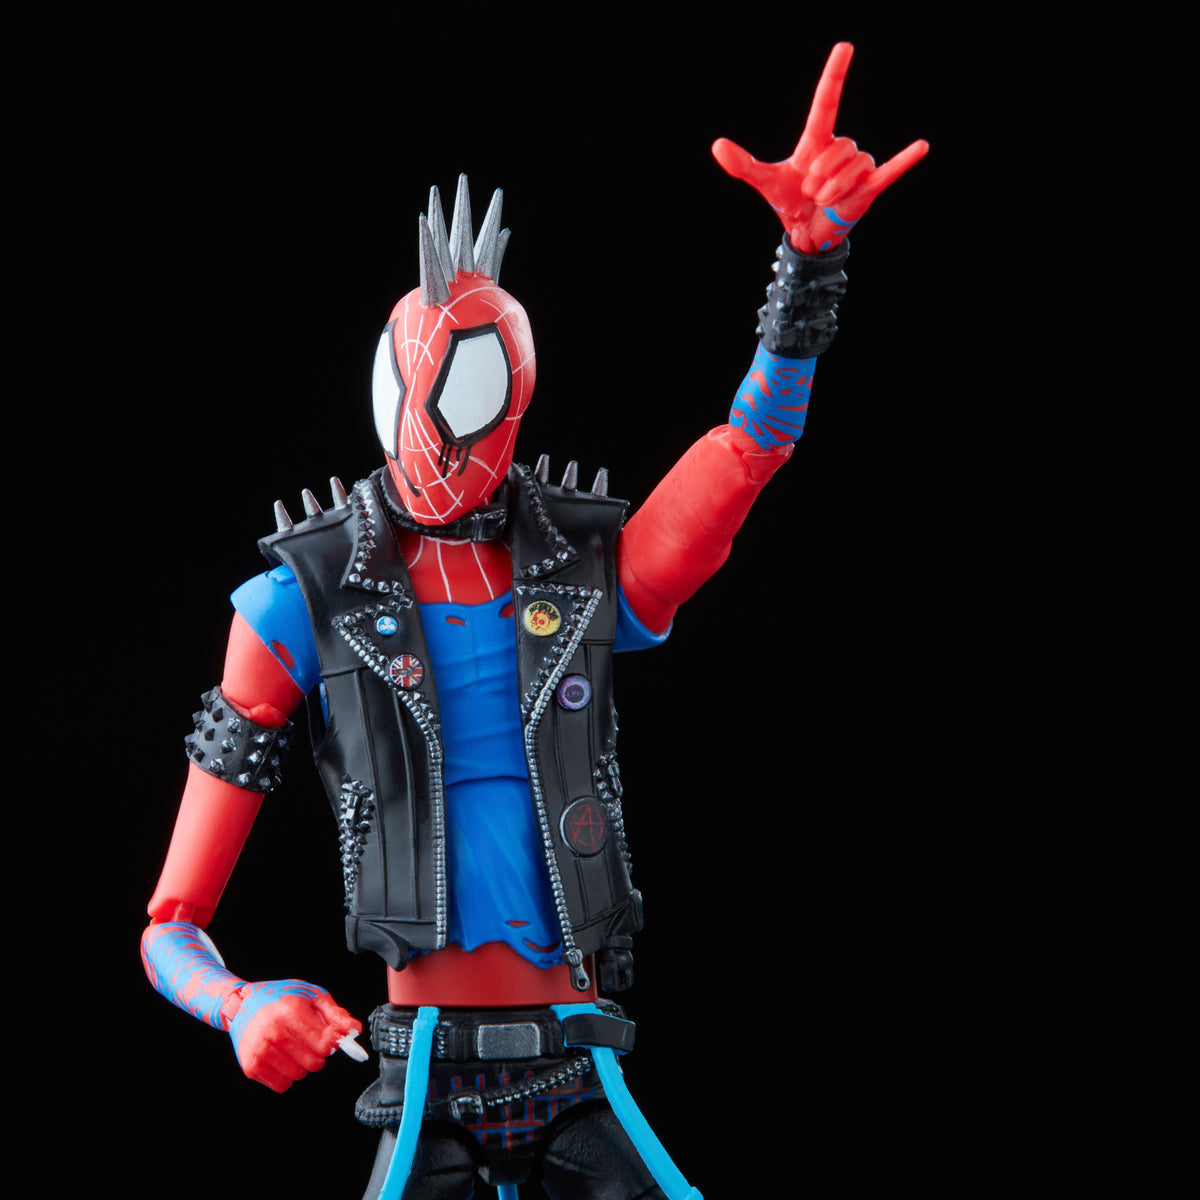 Marvel's Spider-Man: How to Get the Spider-Punk Suit